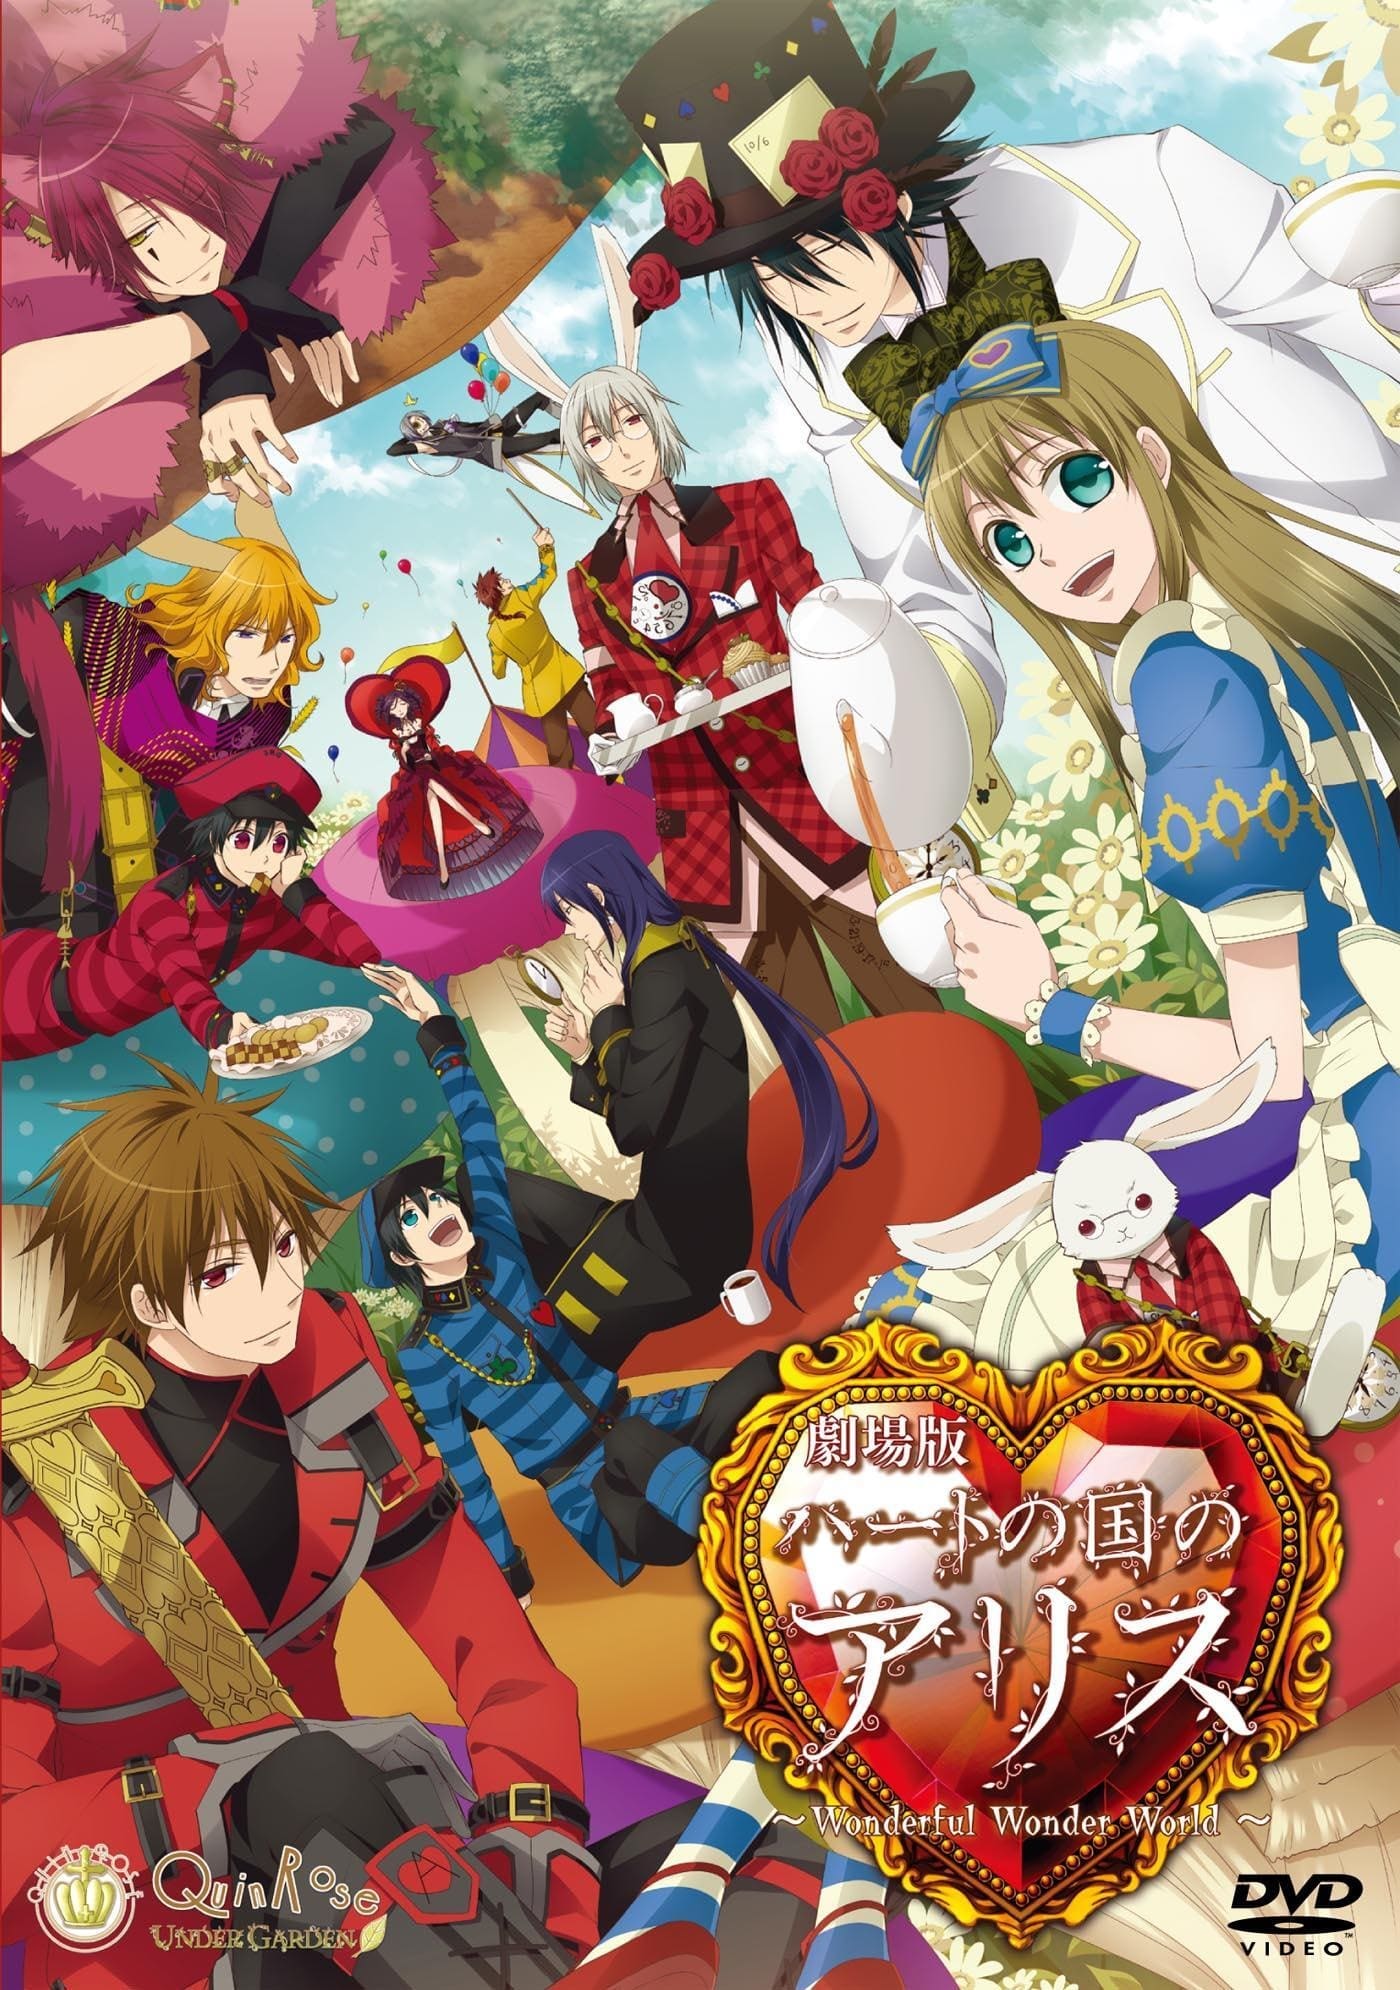 Alice in the Country of Hearts: Wonderful Wonder World